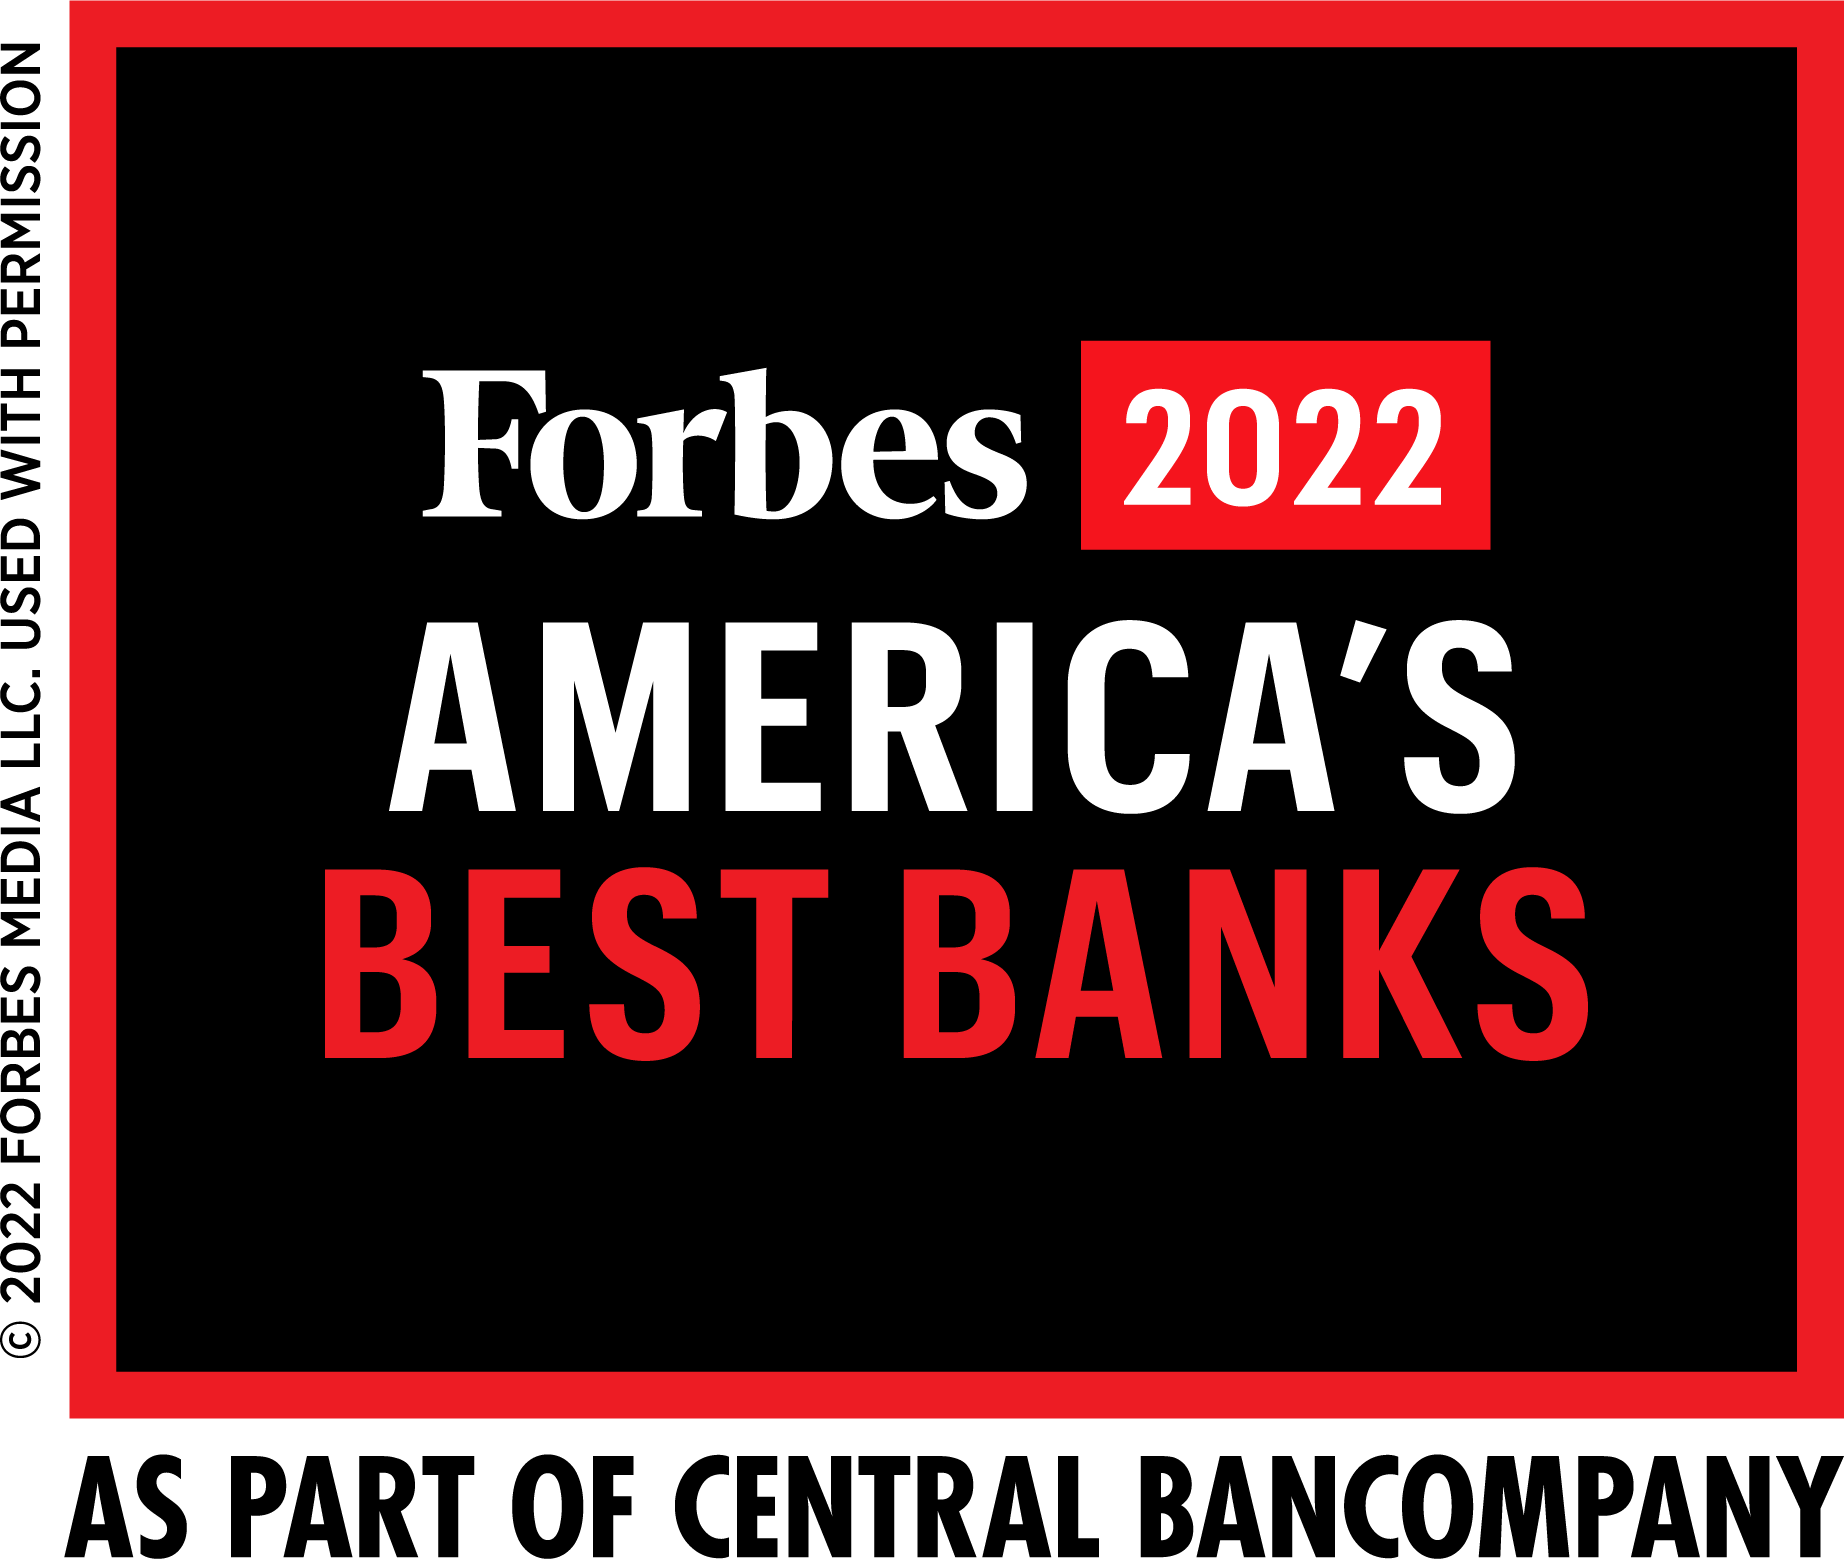 Forbes Best Banks 2022